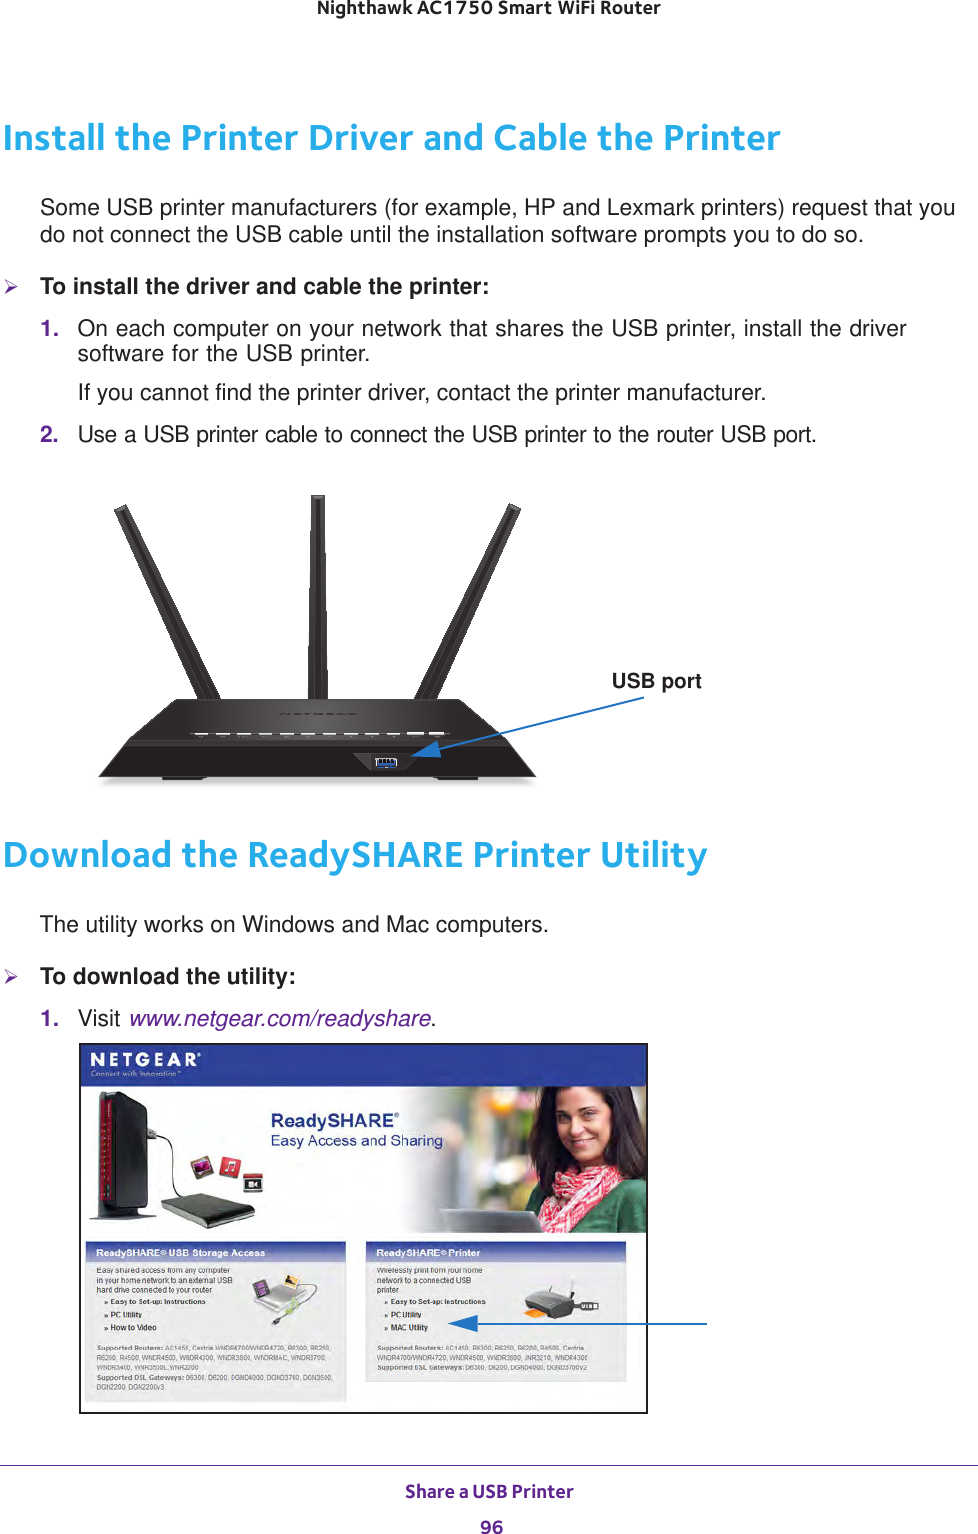 Share a USB Printer 96Nighthawk AC1750 Smart WiFi Router Install the Printer Driver and Cable the PrinterSome USB printer manufacturers (for example, HP and Lexmark printers) request that you do not connect the USB cable until the installation software prompts you to do so.To install the driver and cable the printer:1.  On each computer on your network that shares the USB printer, install the driver software for the USB printer.If you cannot find the printer driver, contact the printer manufacturer.2.  Use a USB printer cable to connect the USB printer to the router USB port. USB portDownload the ReadySHARE Printer UtilityThe utility works on Windows and Mac computers.To download the utility:1.  Visit www.netgear.com/readyshare.